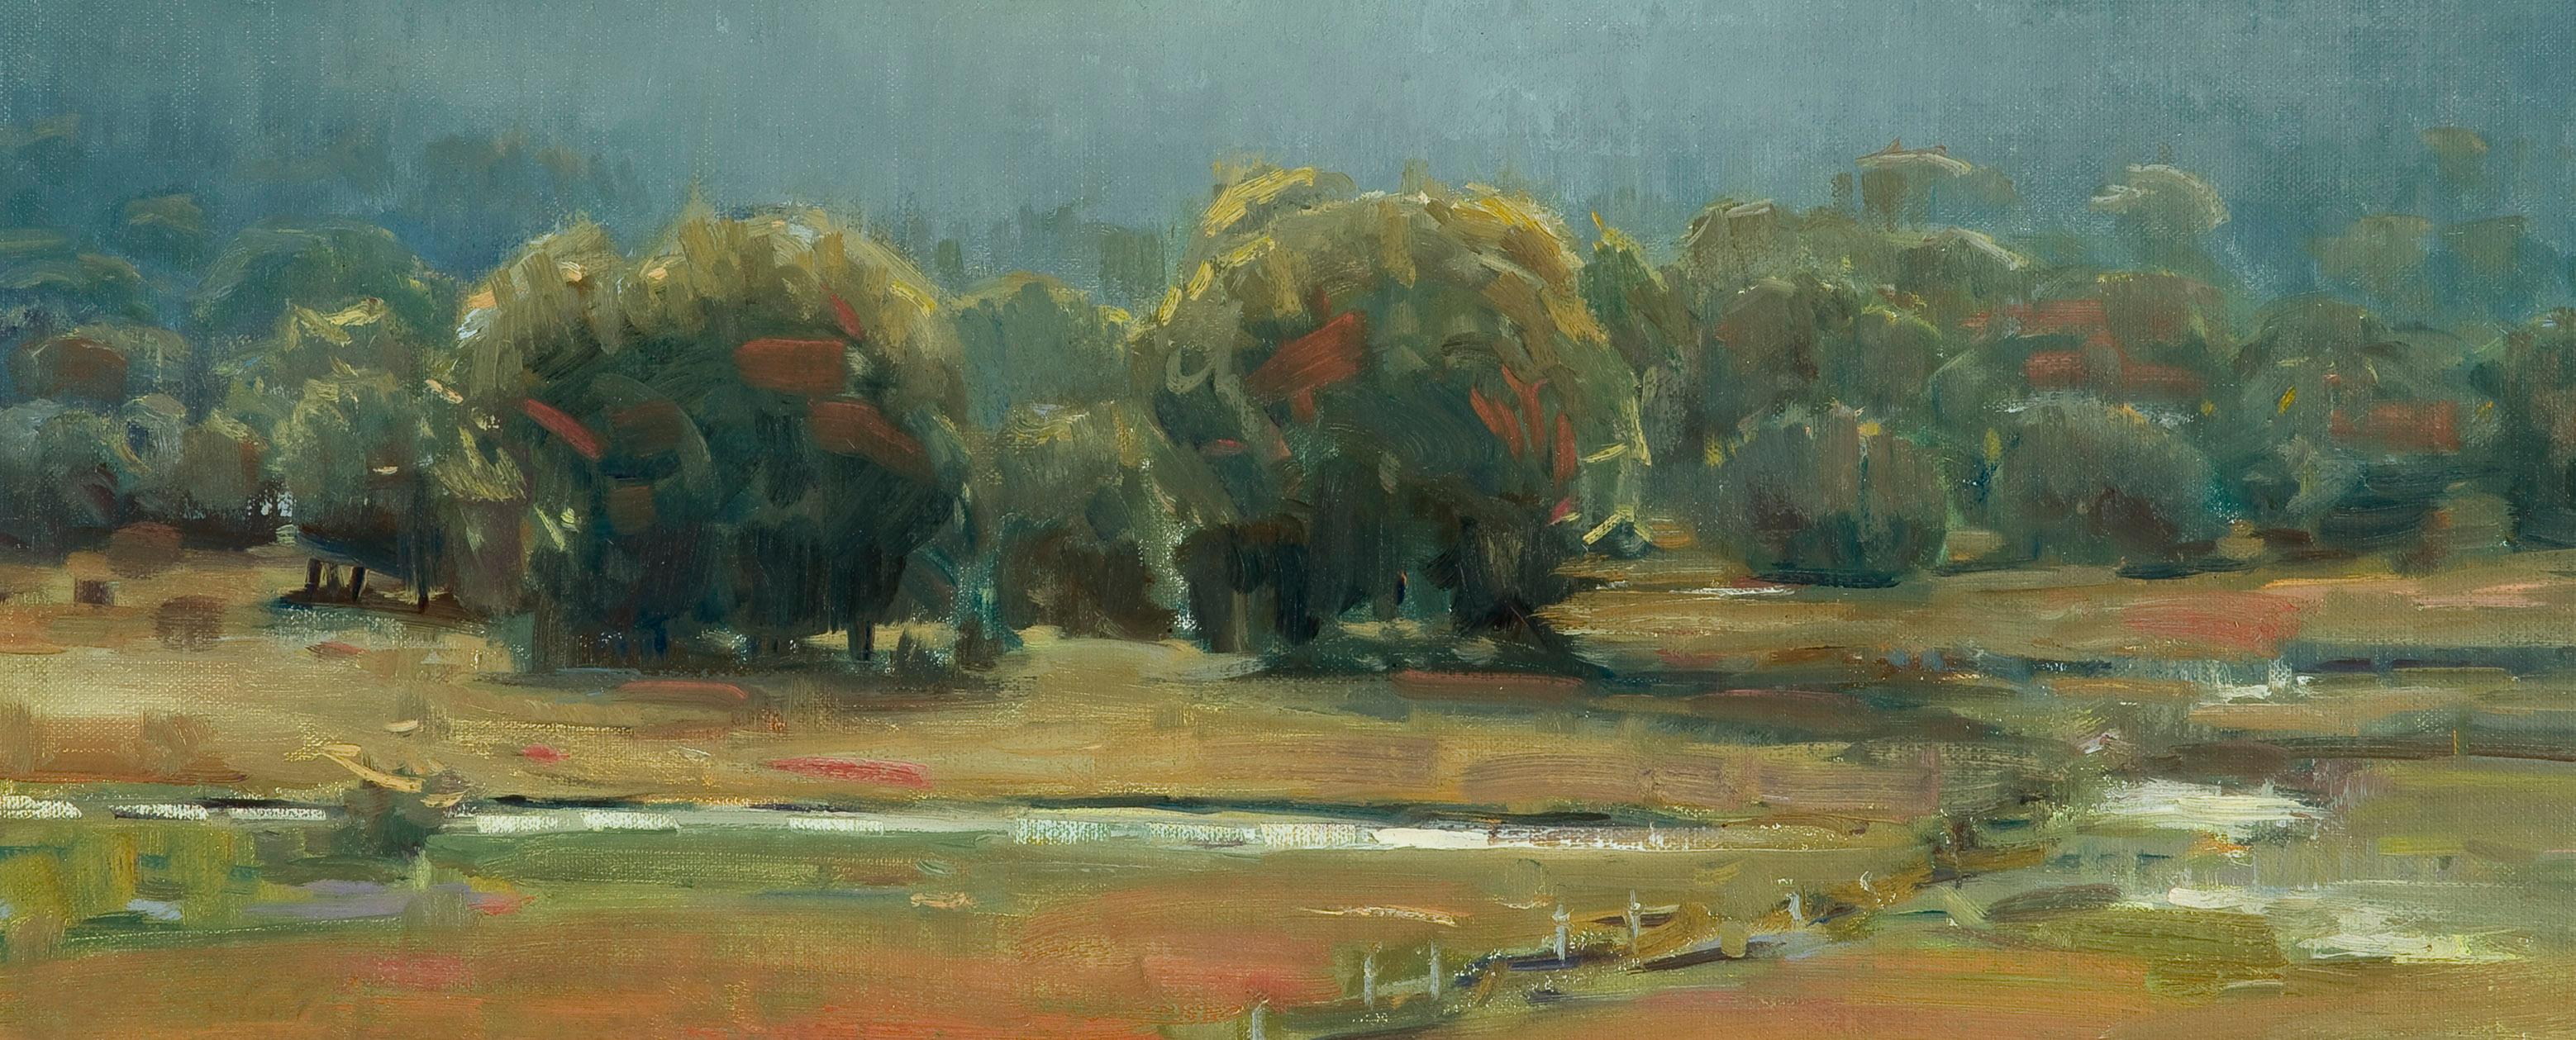 Peter Campbell Landscape Painting - The Animas Valley (abstract, river, fence, lush trees)